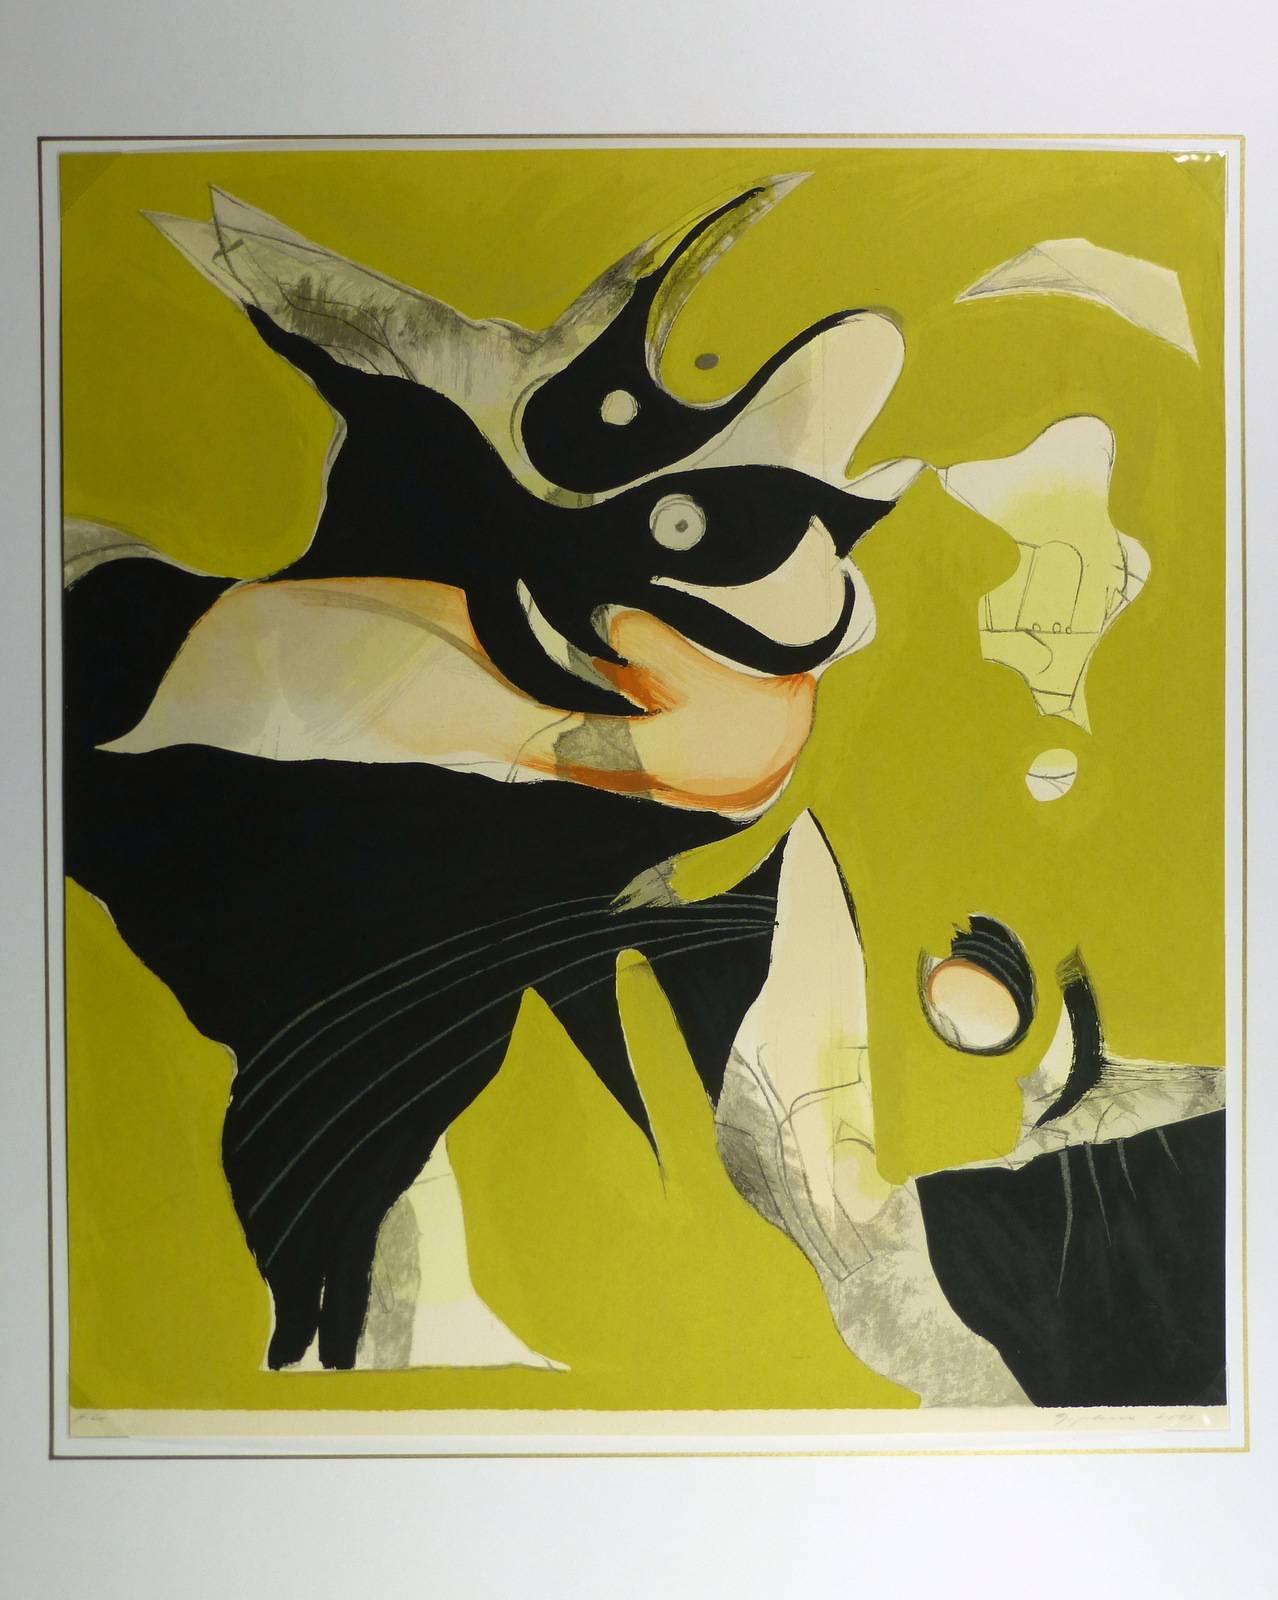 Abstract French lithograph, circa 1980.   Signed lower right.

Original artwork on paper displayed on a white mat with a gold border. Mat fits a standard-size frame.  Archival plastic sleeve and Certificate of Authenticity included. Artwork, 21.25”L